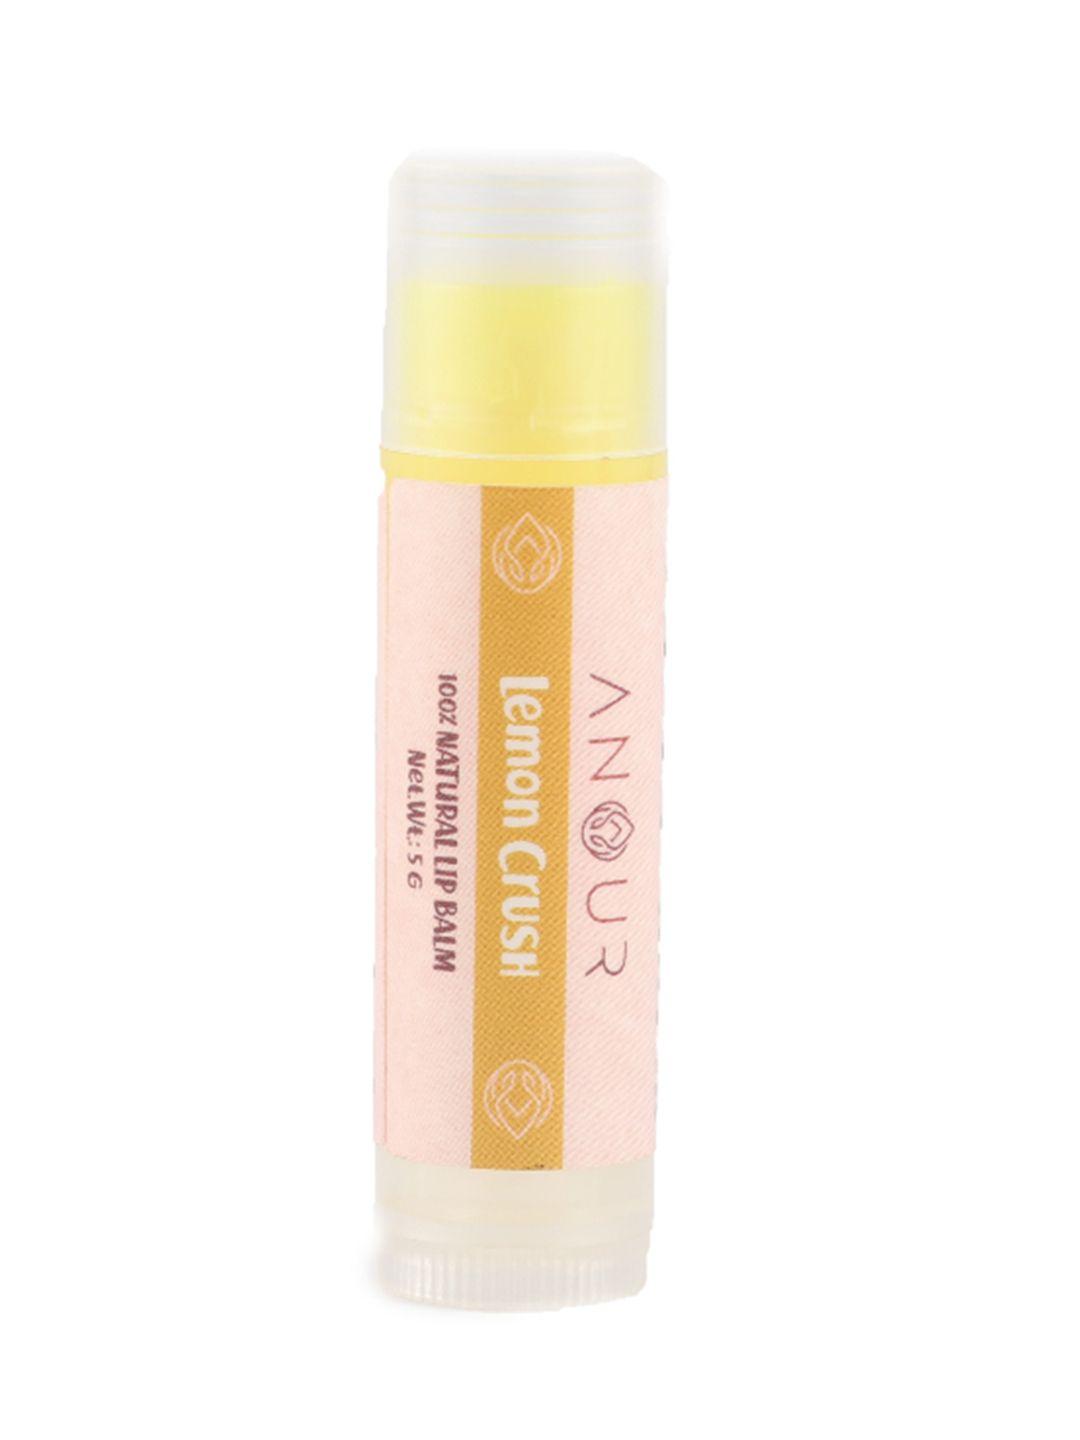 anour lemon crush lip balm with shea & cocoa butter for chapped & dry lips - 5g